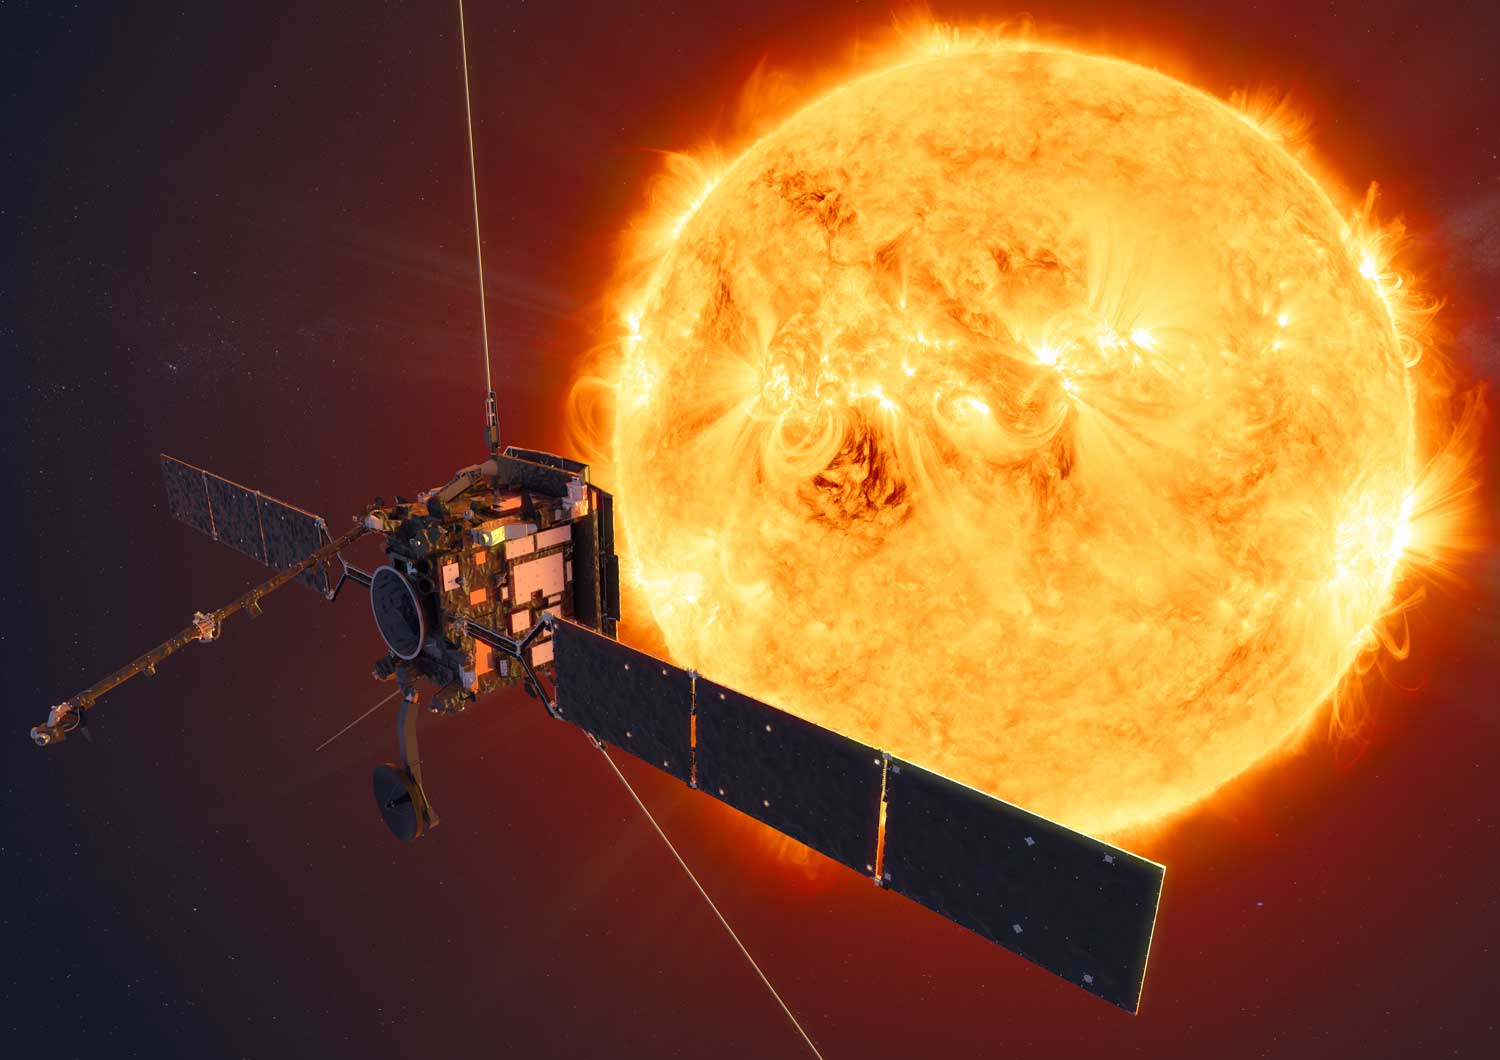 ESA's Solar Orbiter mission will face the Sun from within the orbit of Mercury at its closest approach. Credit: ESA/ATG medialab